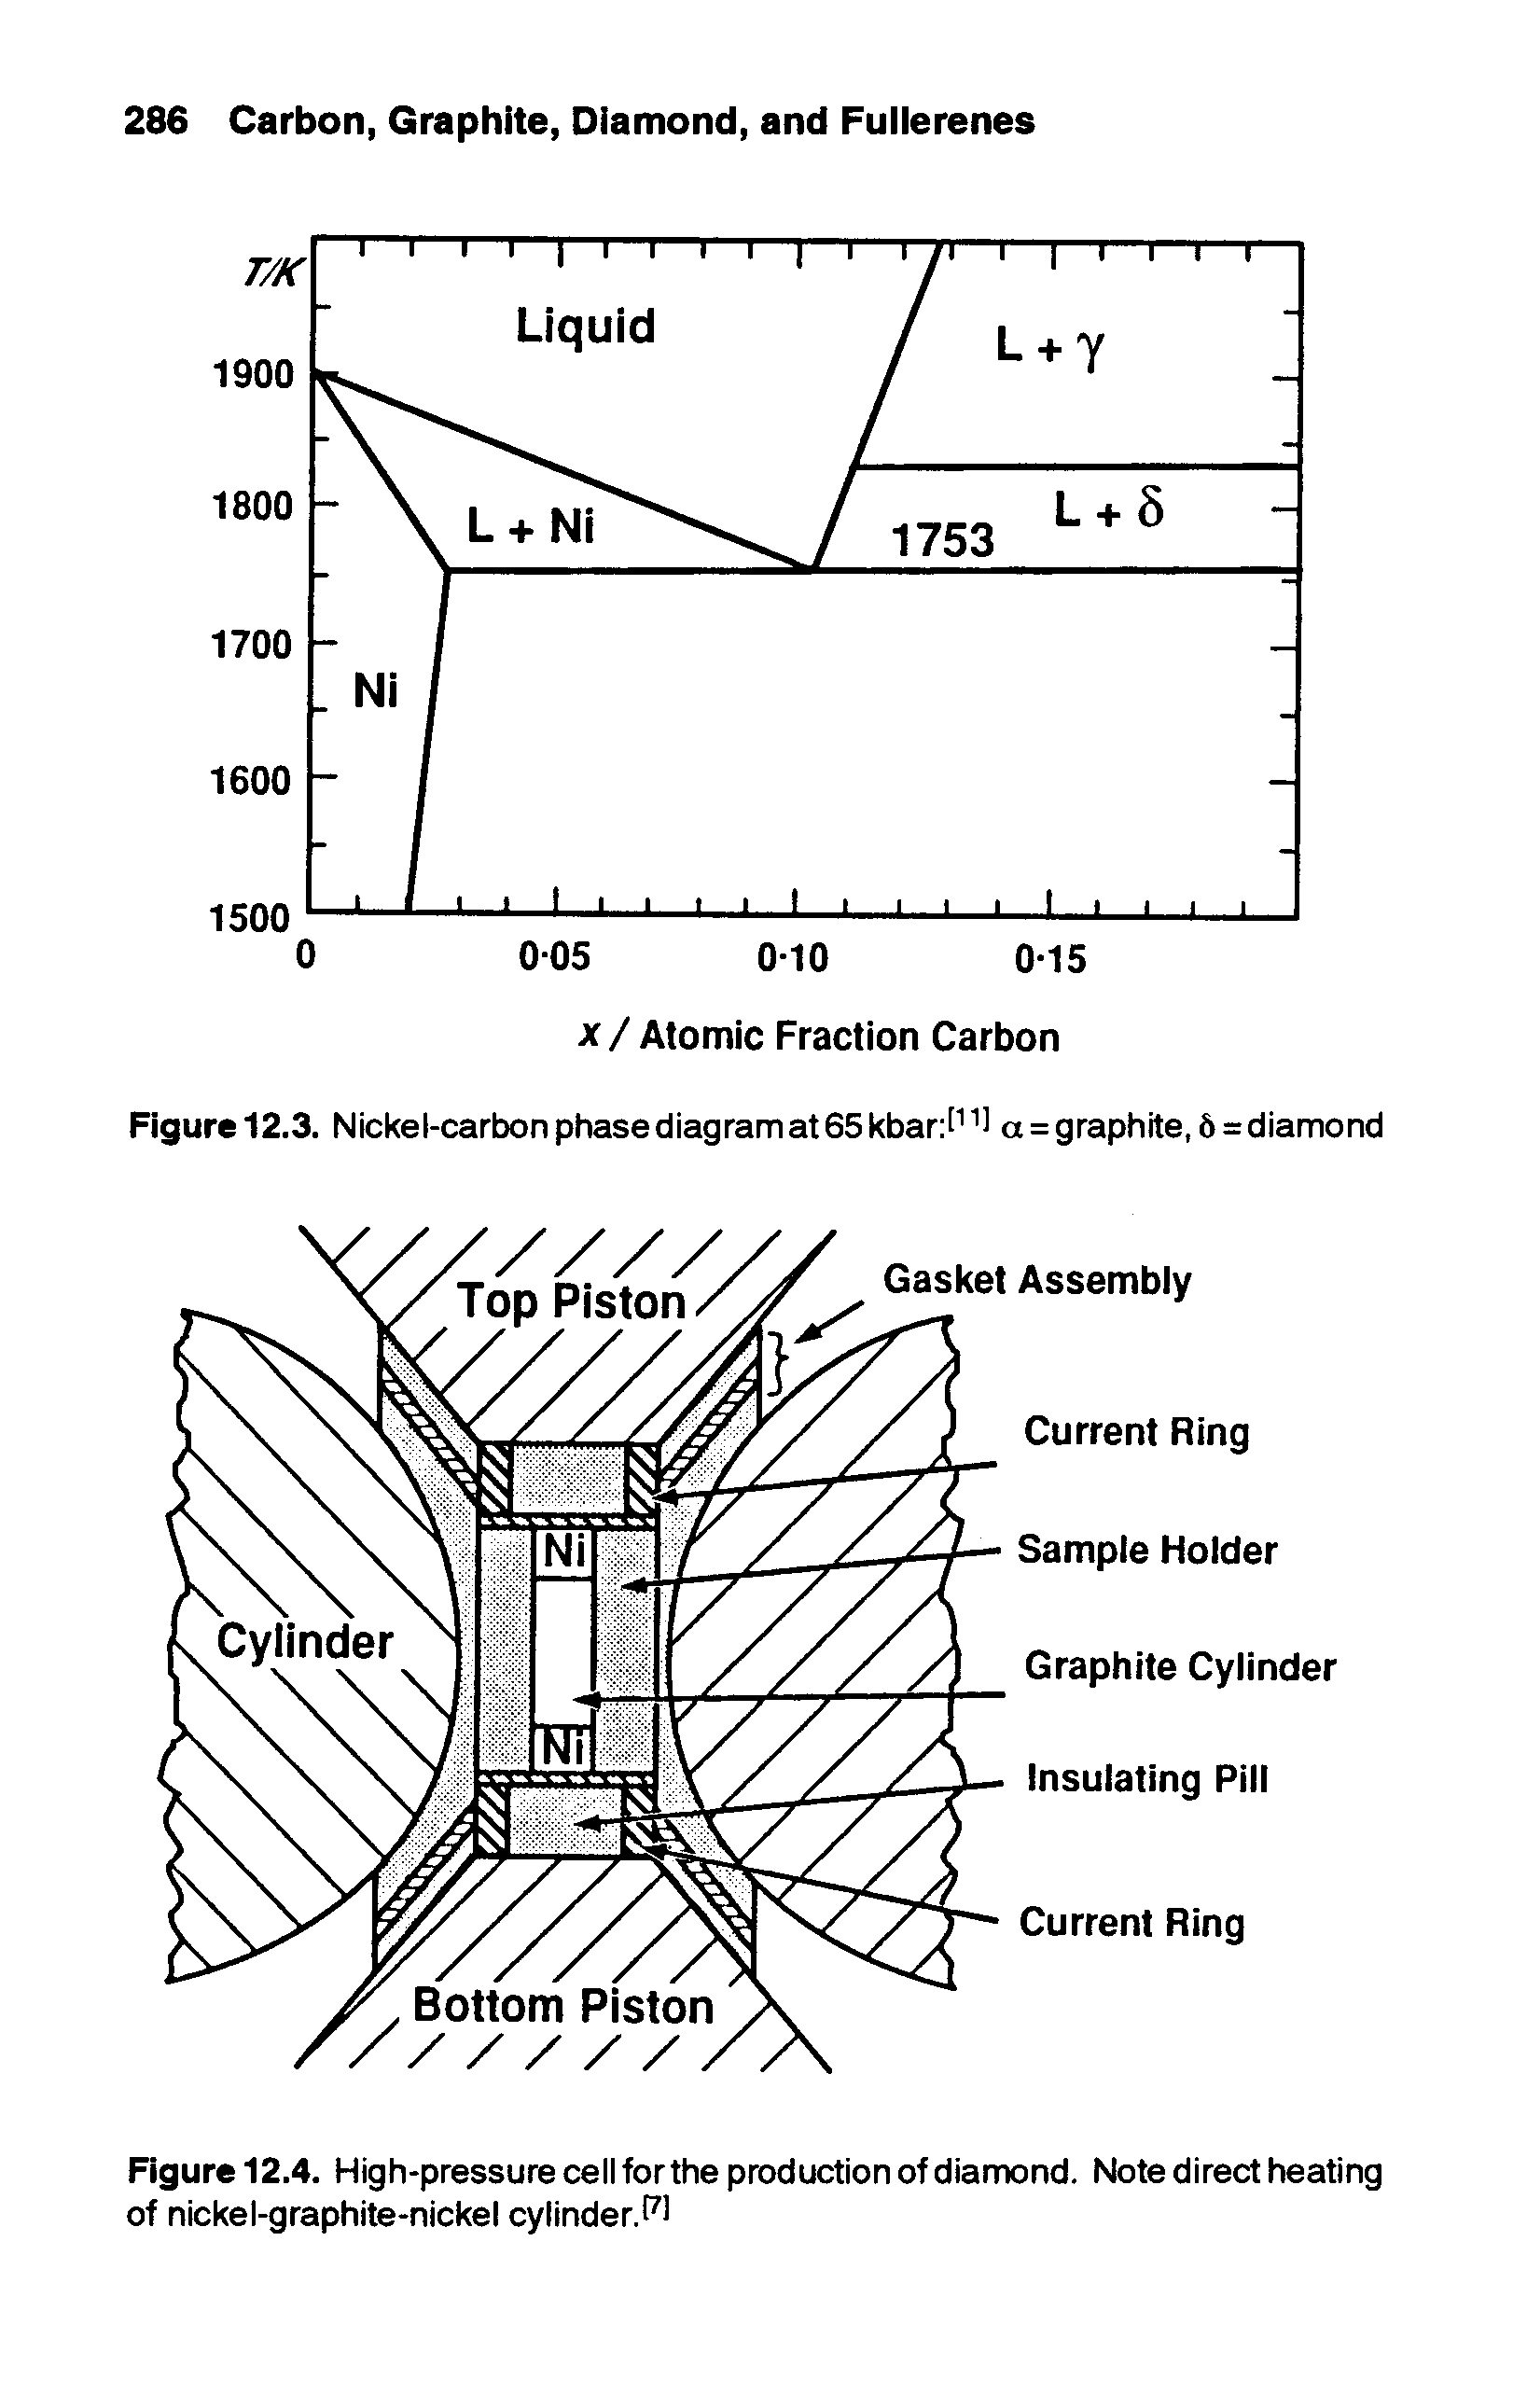 Figure 12.4. High-pressure cell for the production of diamond. Note direct heating of nickel-graphite-nickel cylinder.PI...